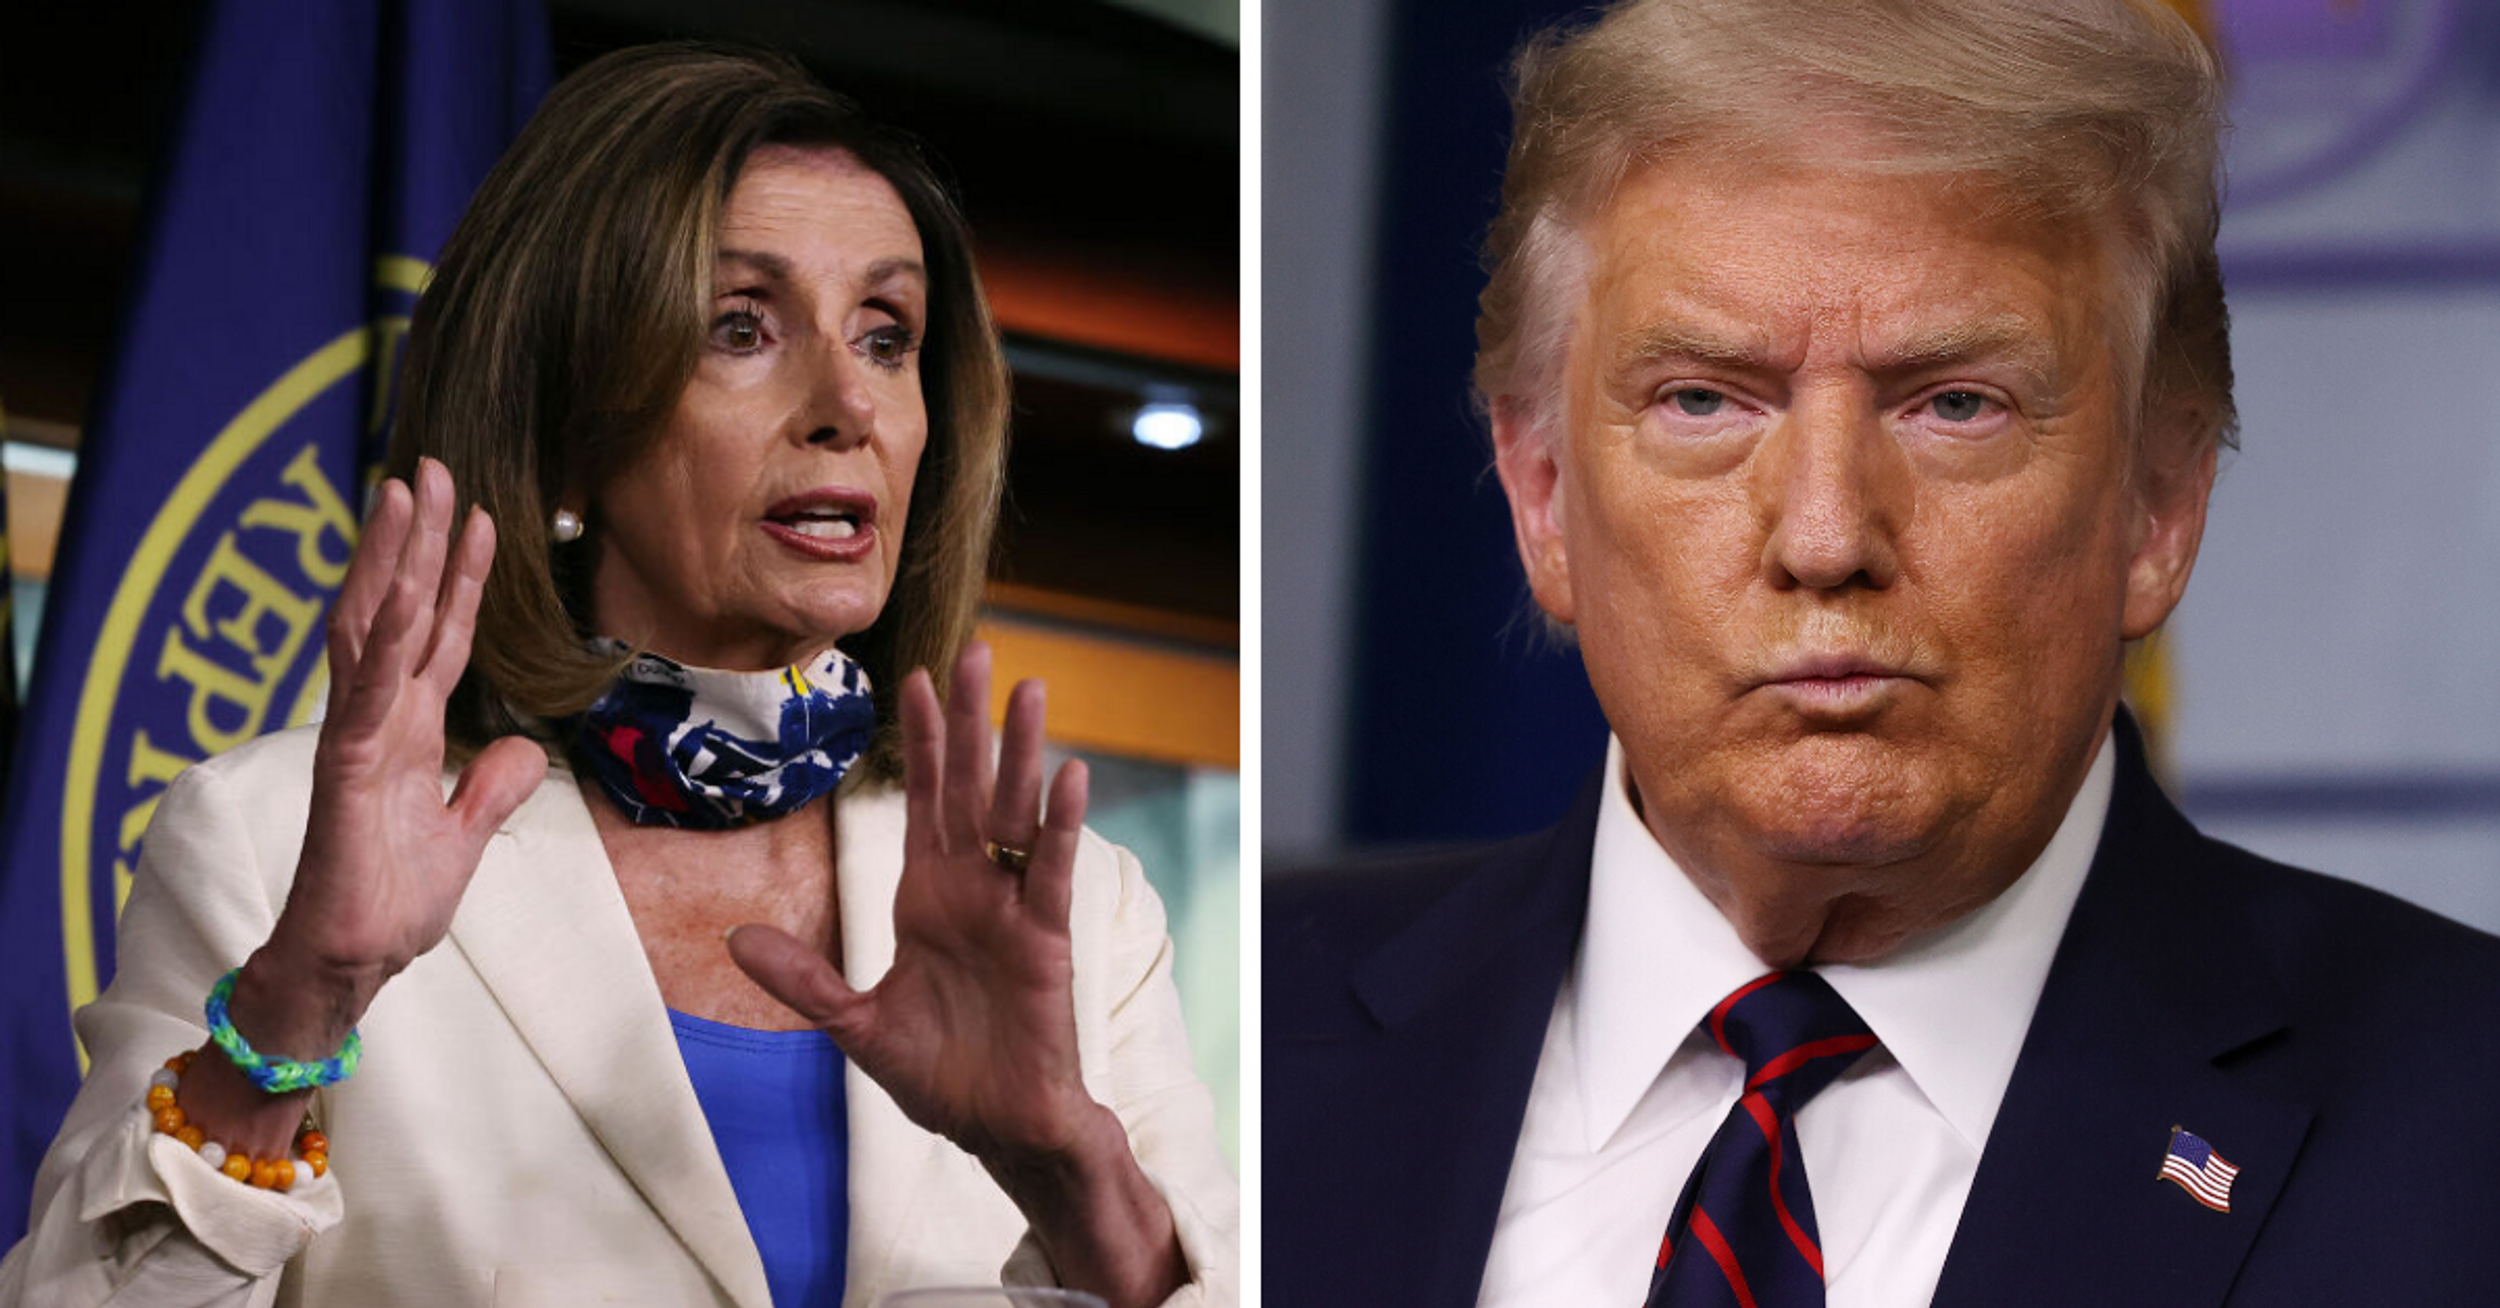 Nancy Pelosi Takes A Page Out Of Trump's Playbook With Her Brutal New Nickname For The Virus